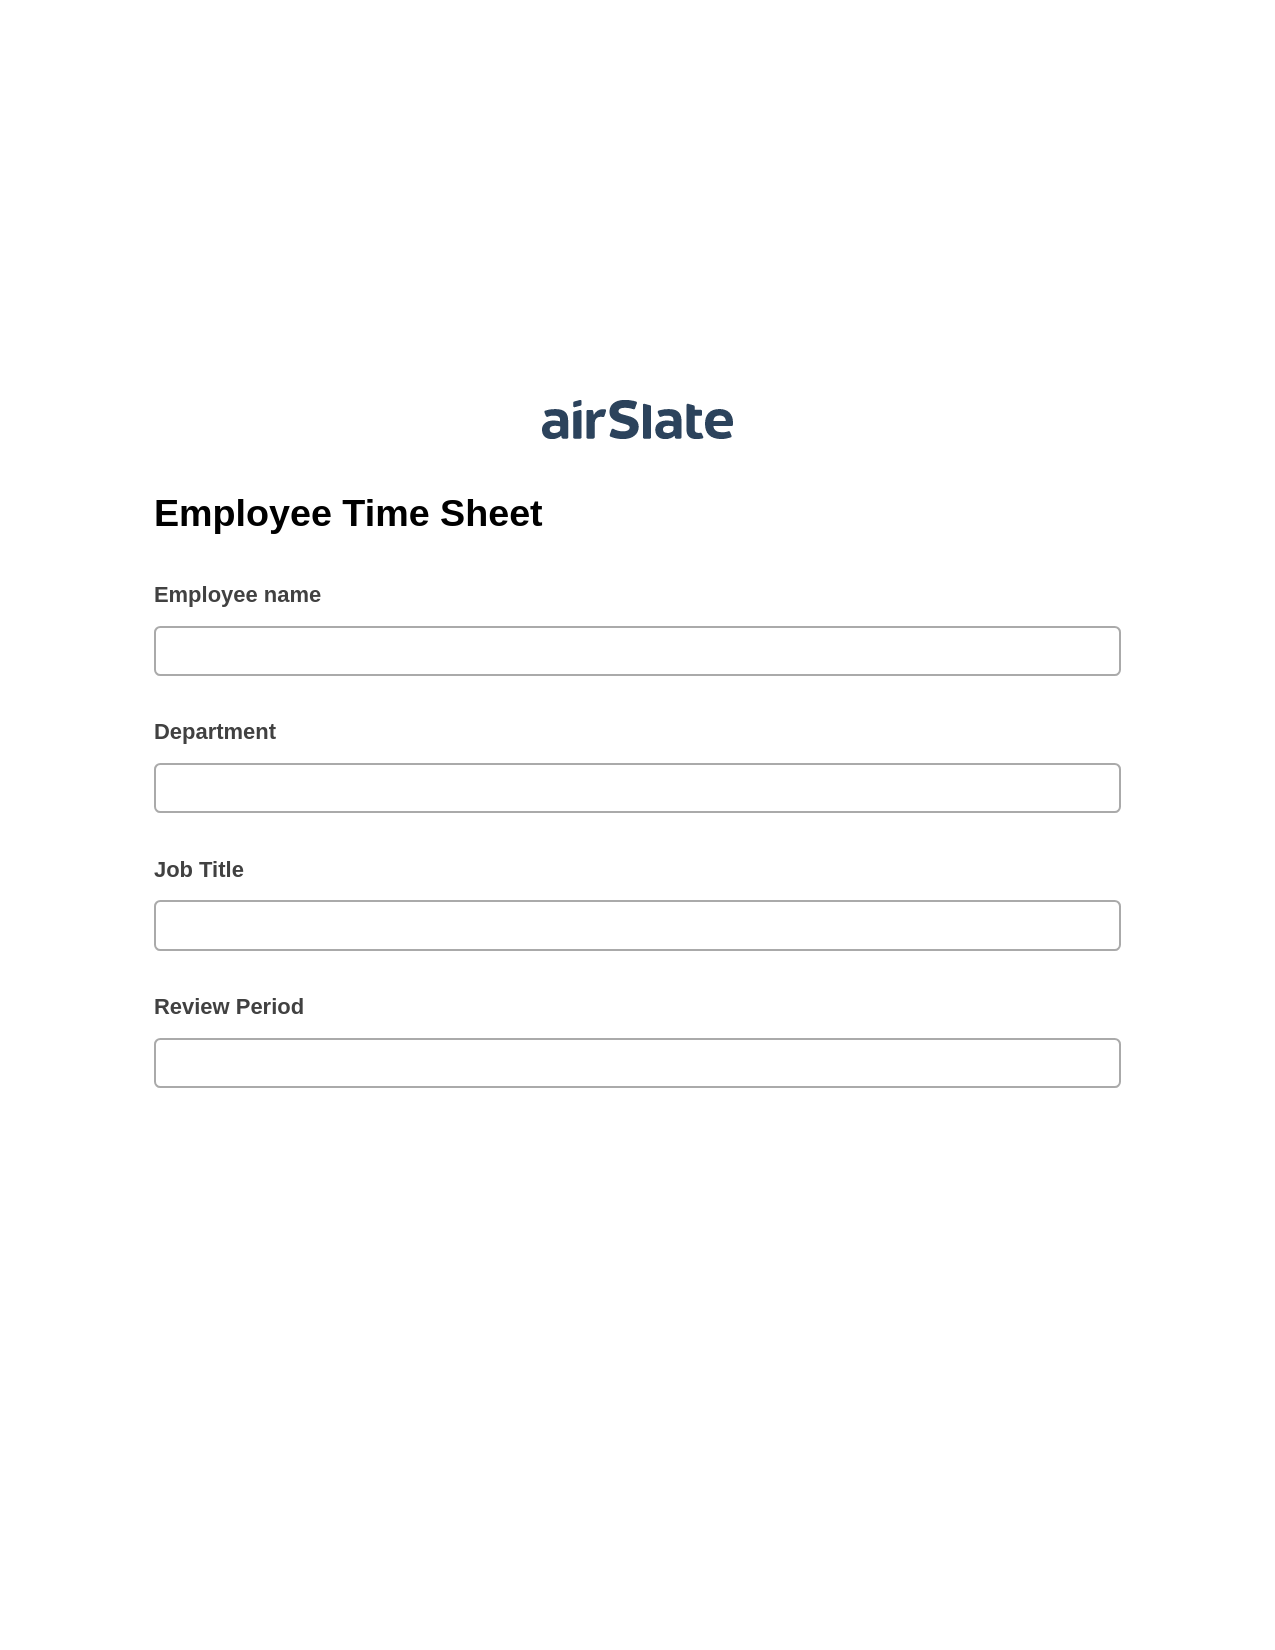 Employee Time Sheet Prefill from NetSuite records, Create slate addon, Export to Salesforce Record Bot